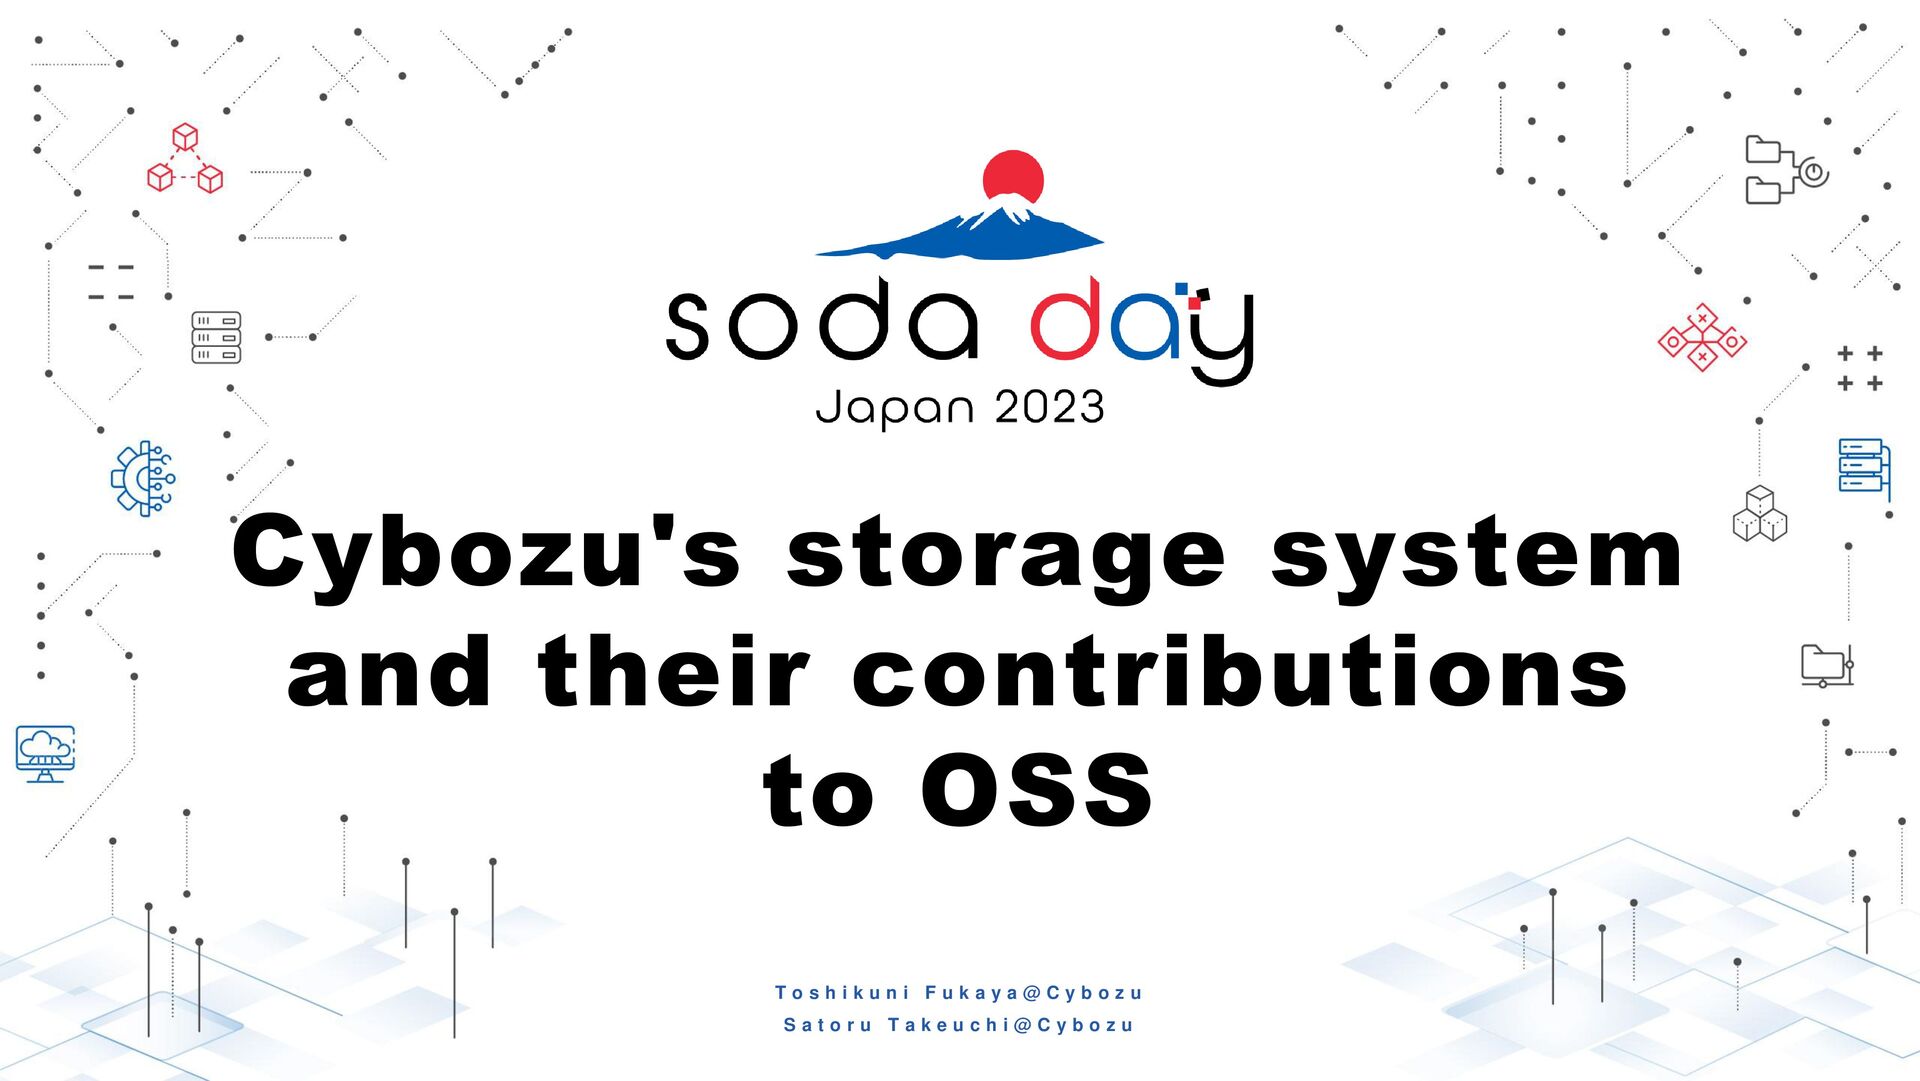 Slide Top: Cybozu's storage system and their contributions to OSS